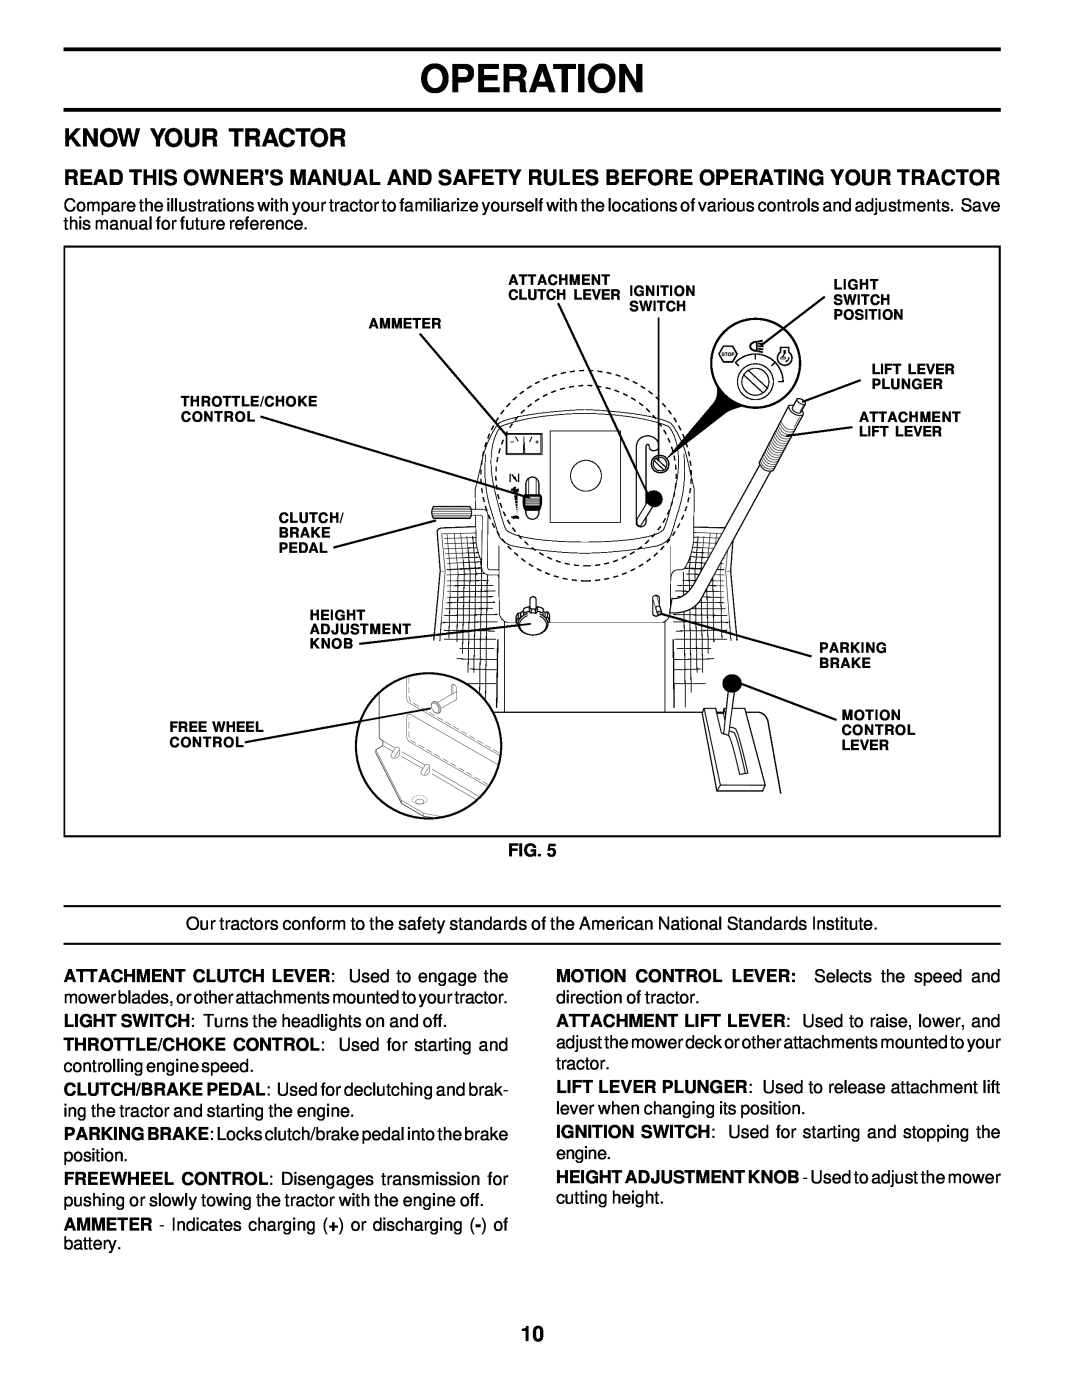 Poulan 177029 owner manual Know Your Tractor, Operation 